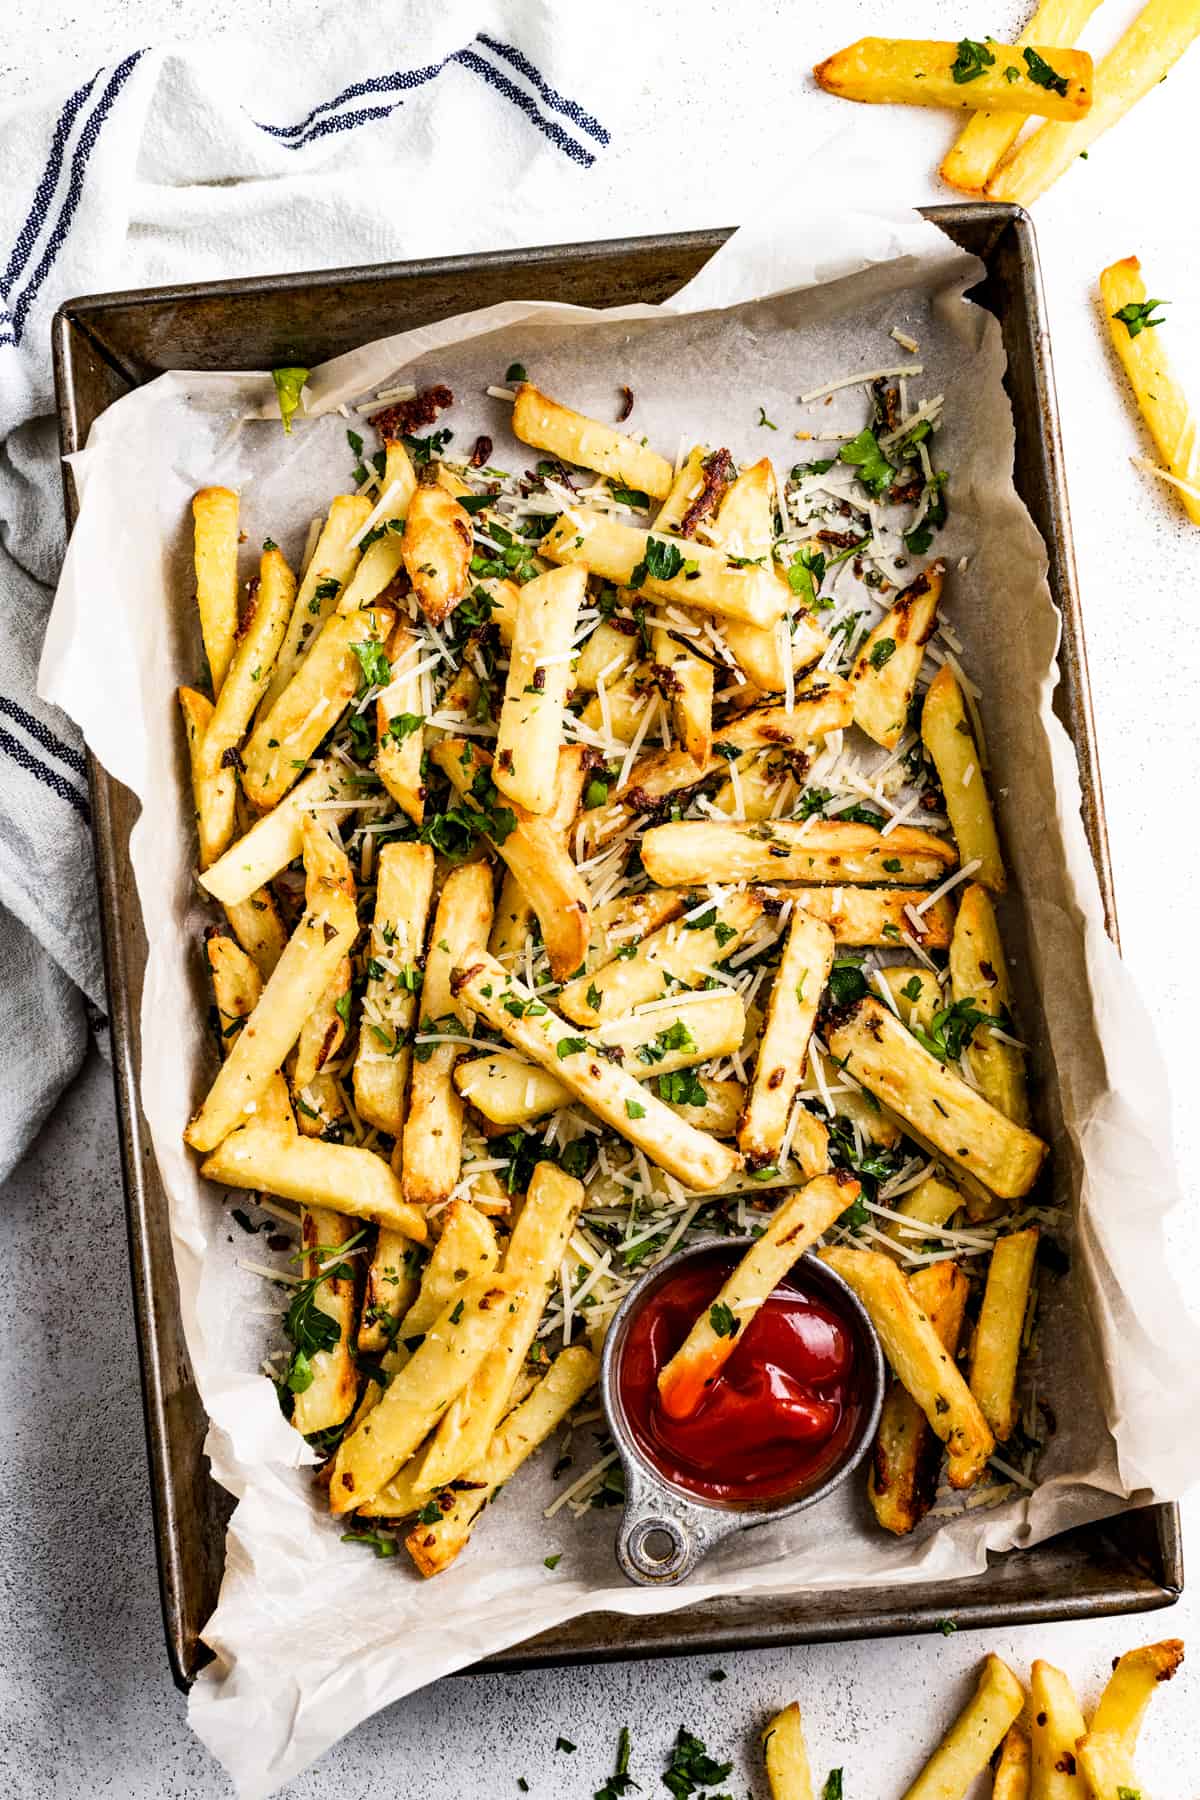 Parmesan truffle fries in a baking pan lined with parchment paper.